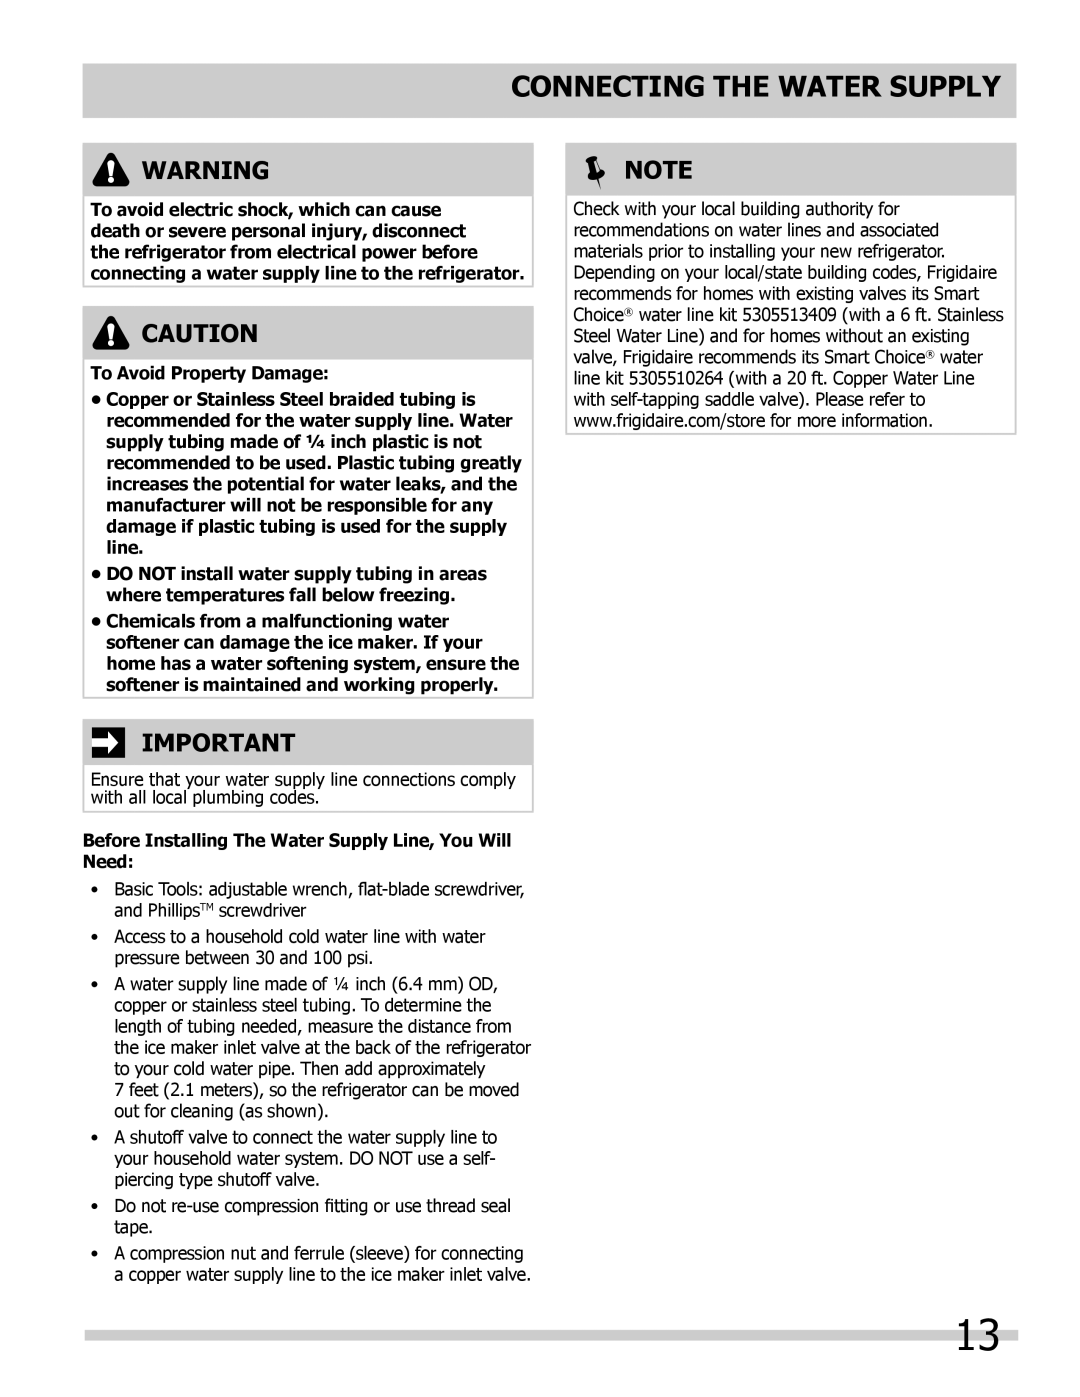 Frigidaire FGHF2366PF, FGHB2866PF, FPHB2899PF important safety instructions Connecting The Water Supply,  Note 